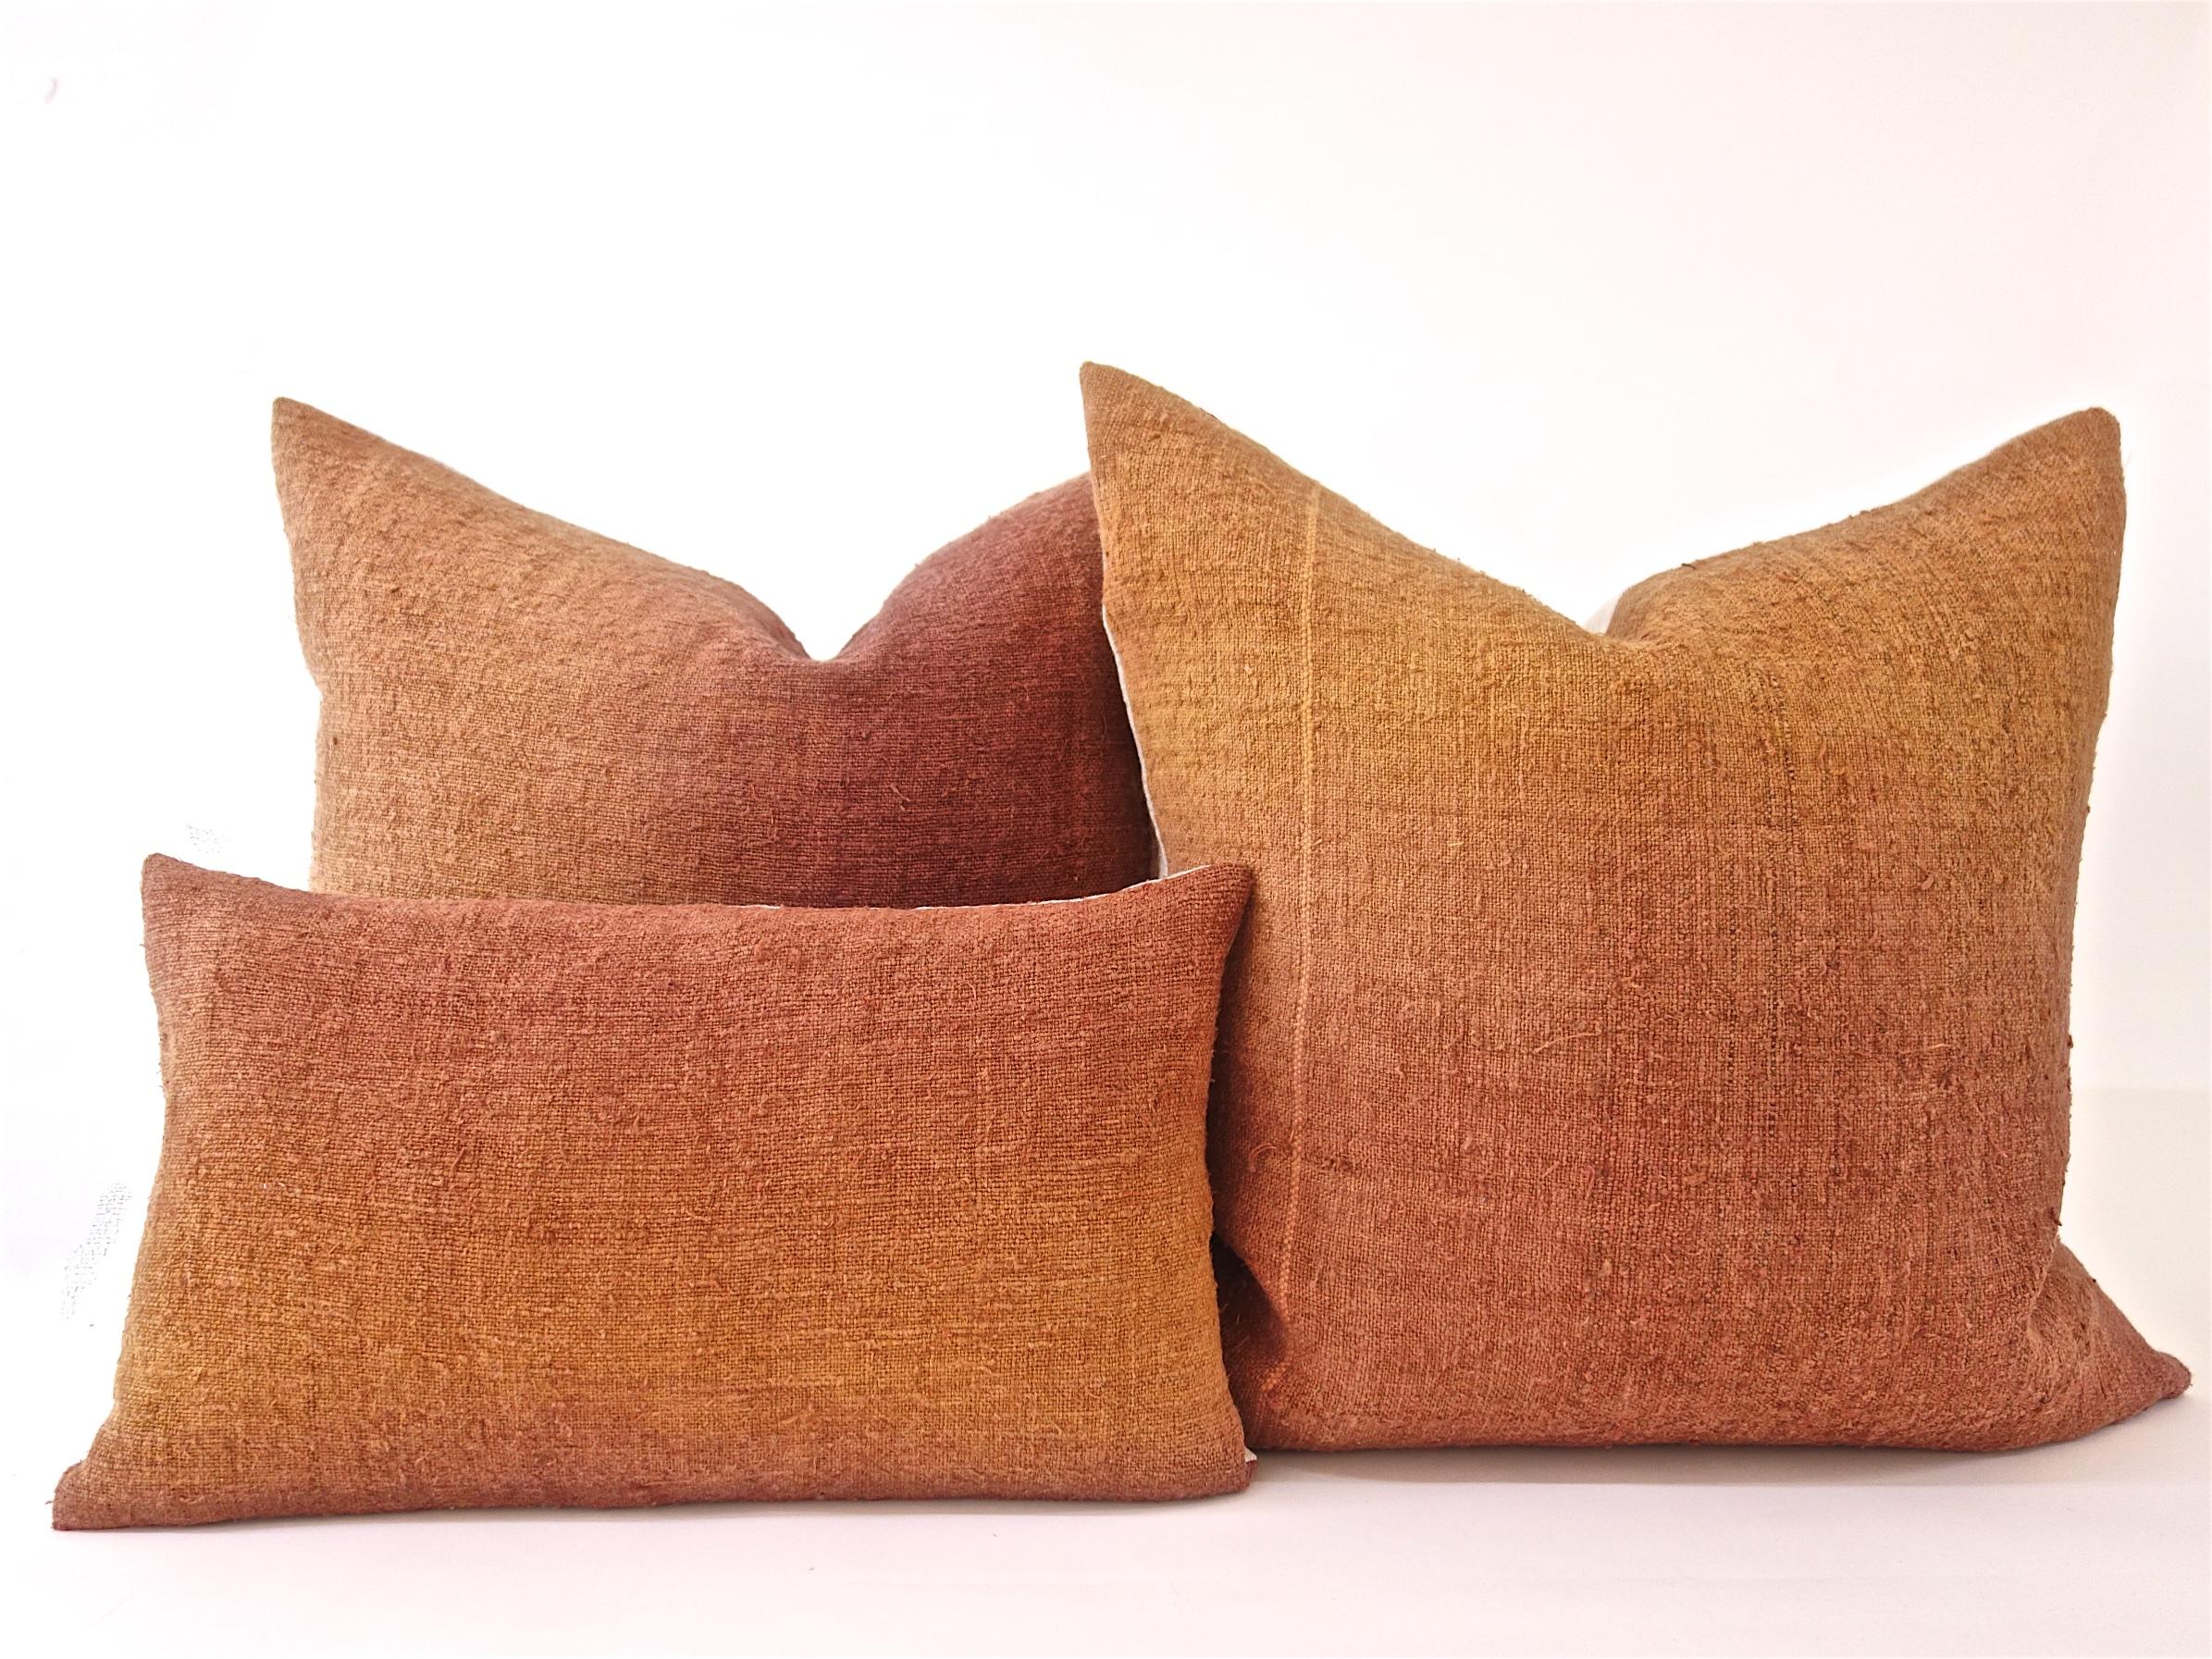 Hand Painted Vintage Linen and Hemp Square Pillow in Orange Tones, in Stock 8